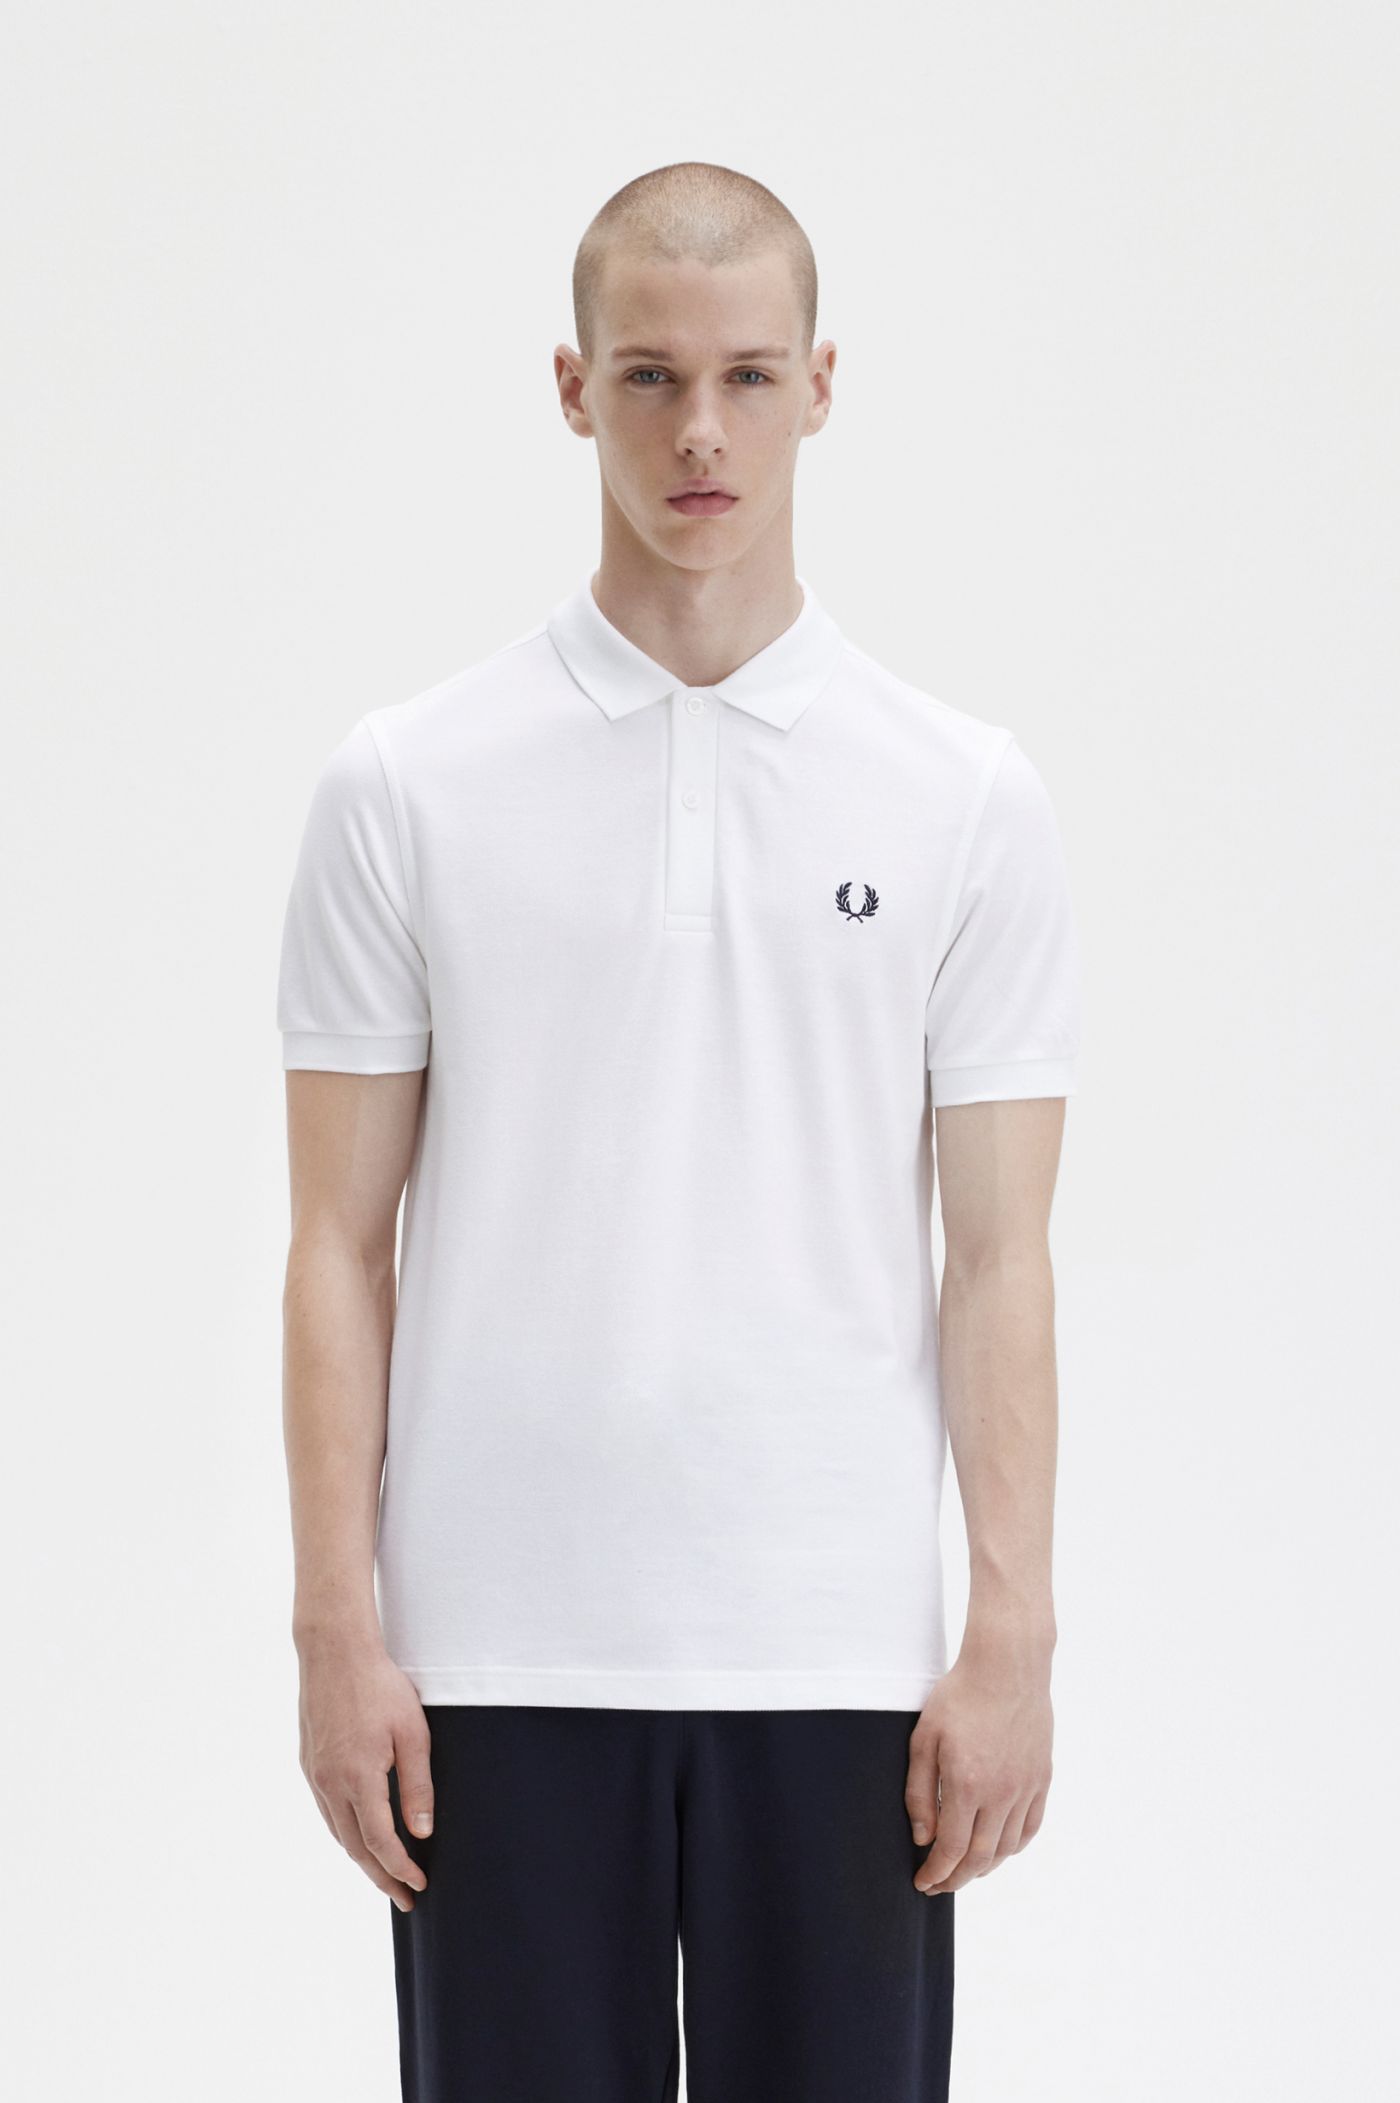 The Fred Perry Shirt - G6000 ポロシャツ 販売チャネル - 通販 ...